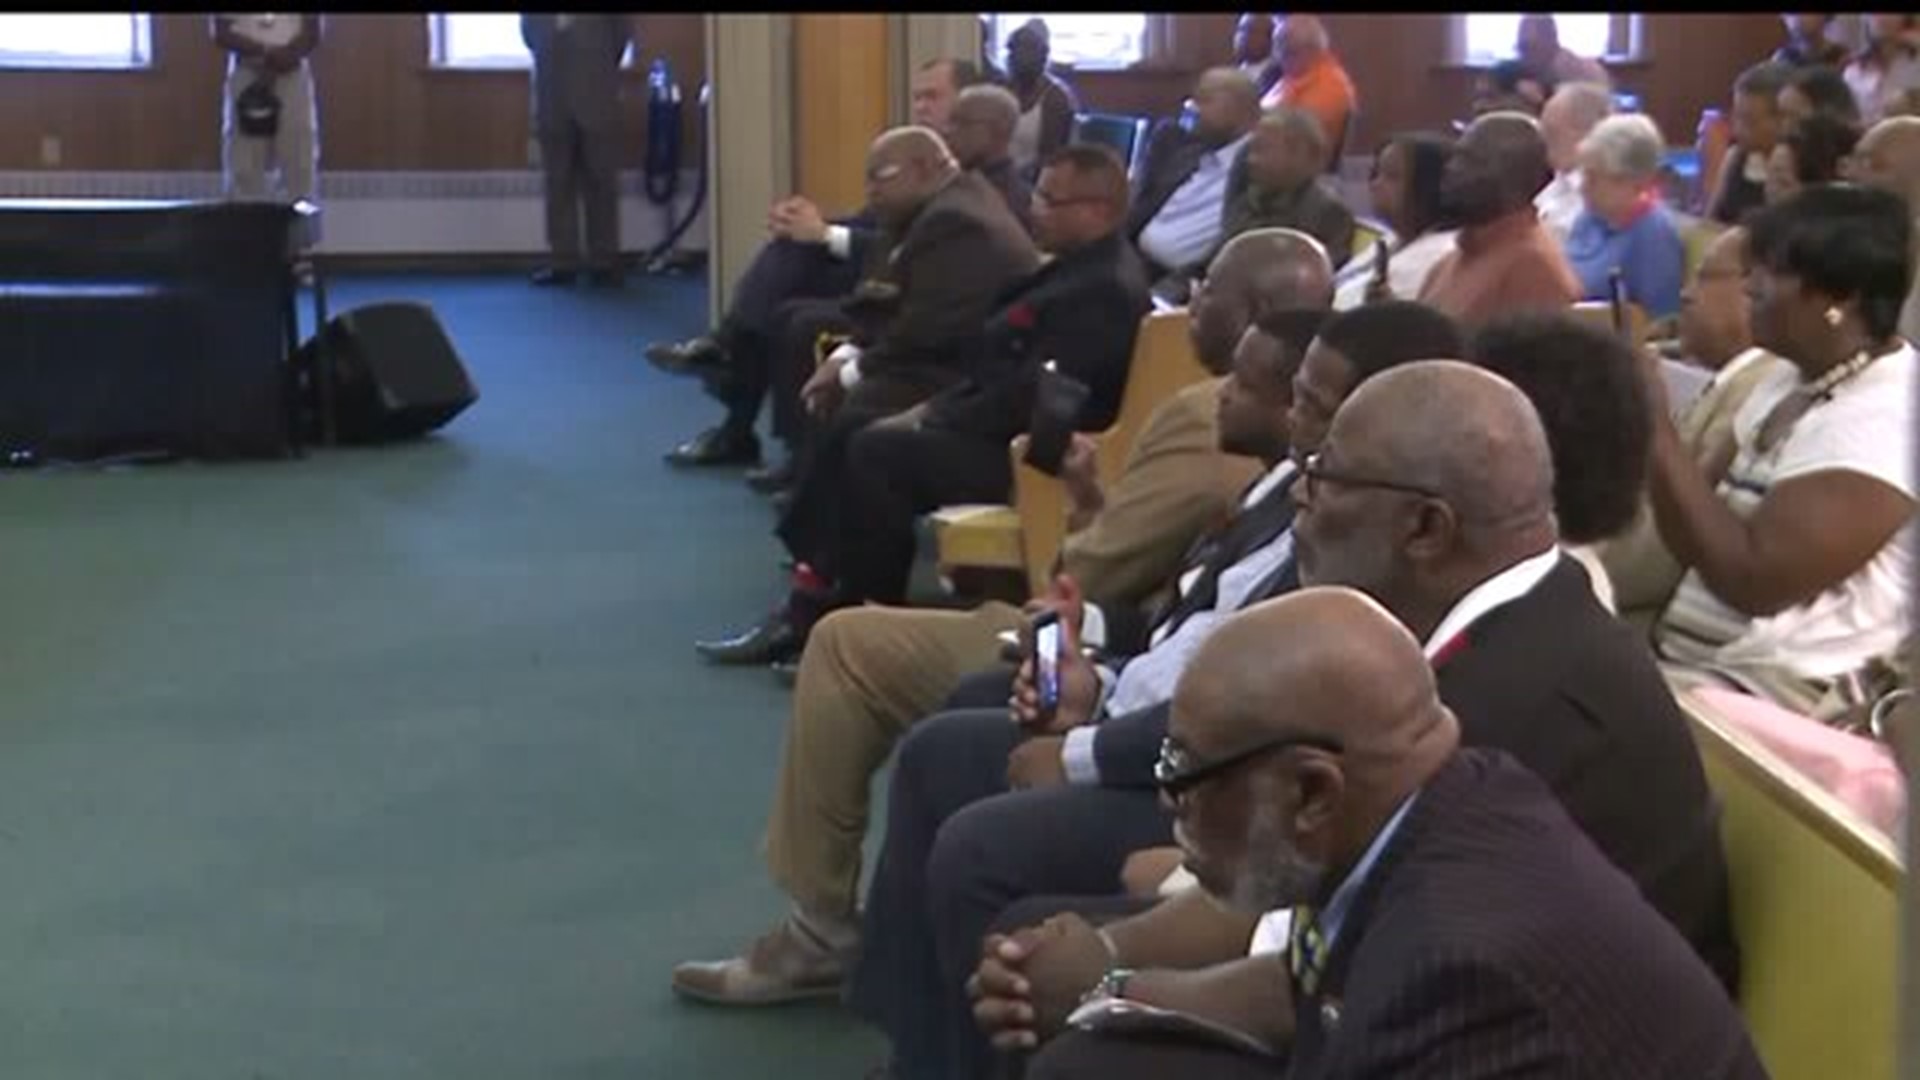 Community gathers to discuss solutions to stop violence in Harrisburg